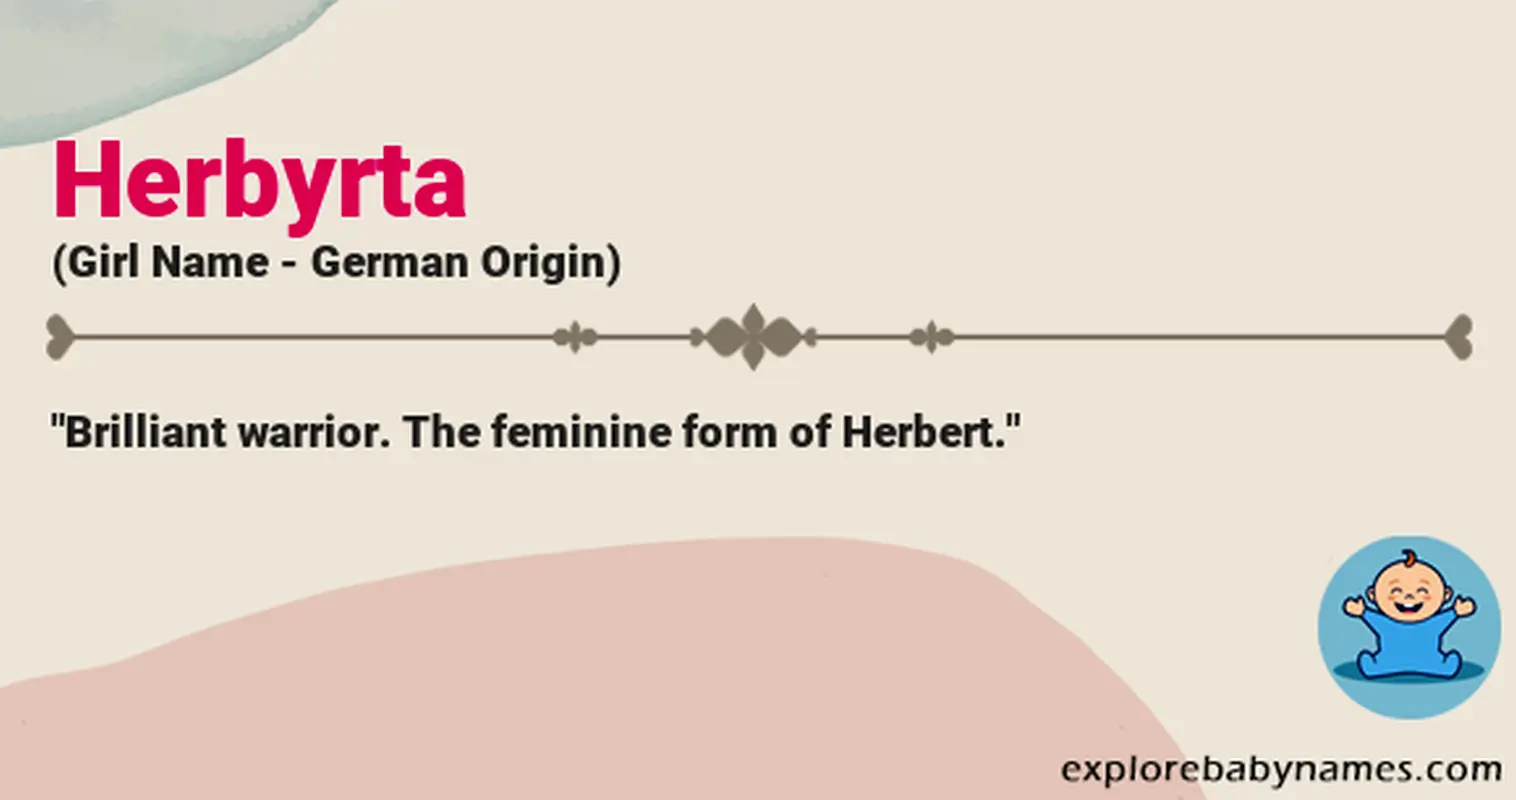 Meaning of Herbyrta